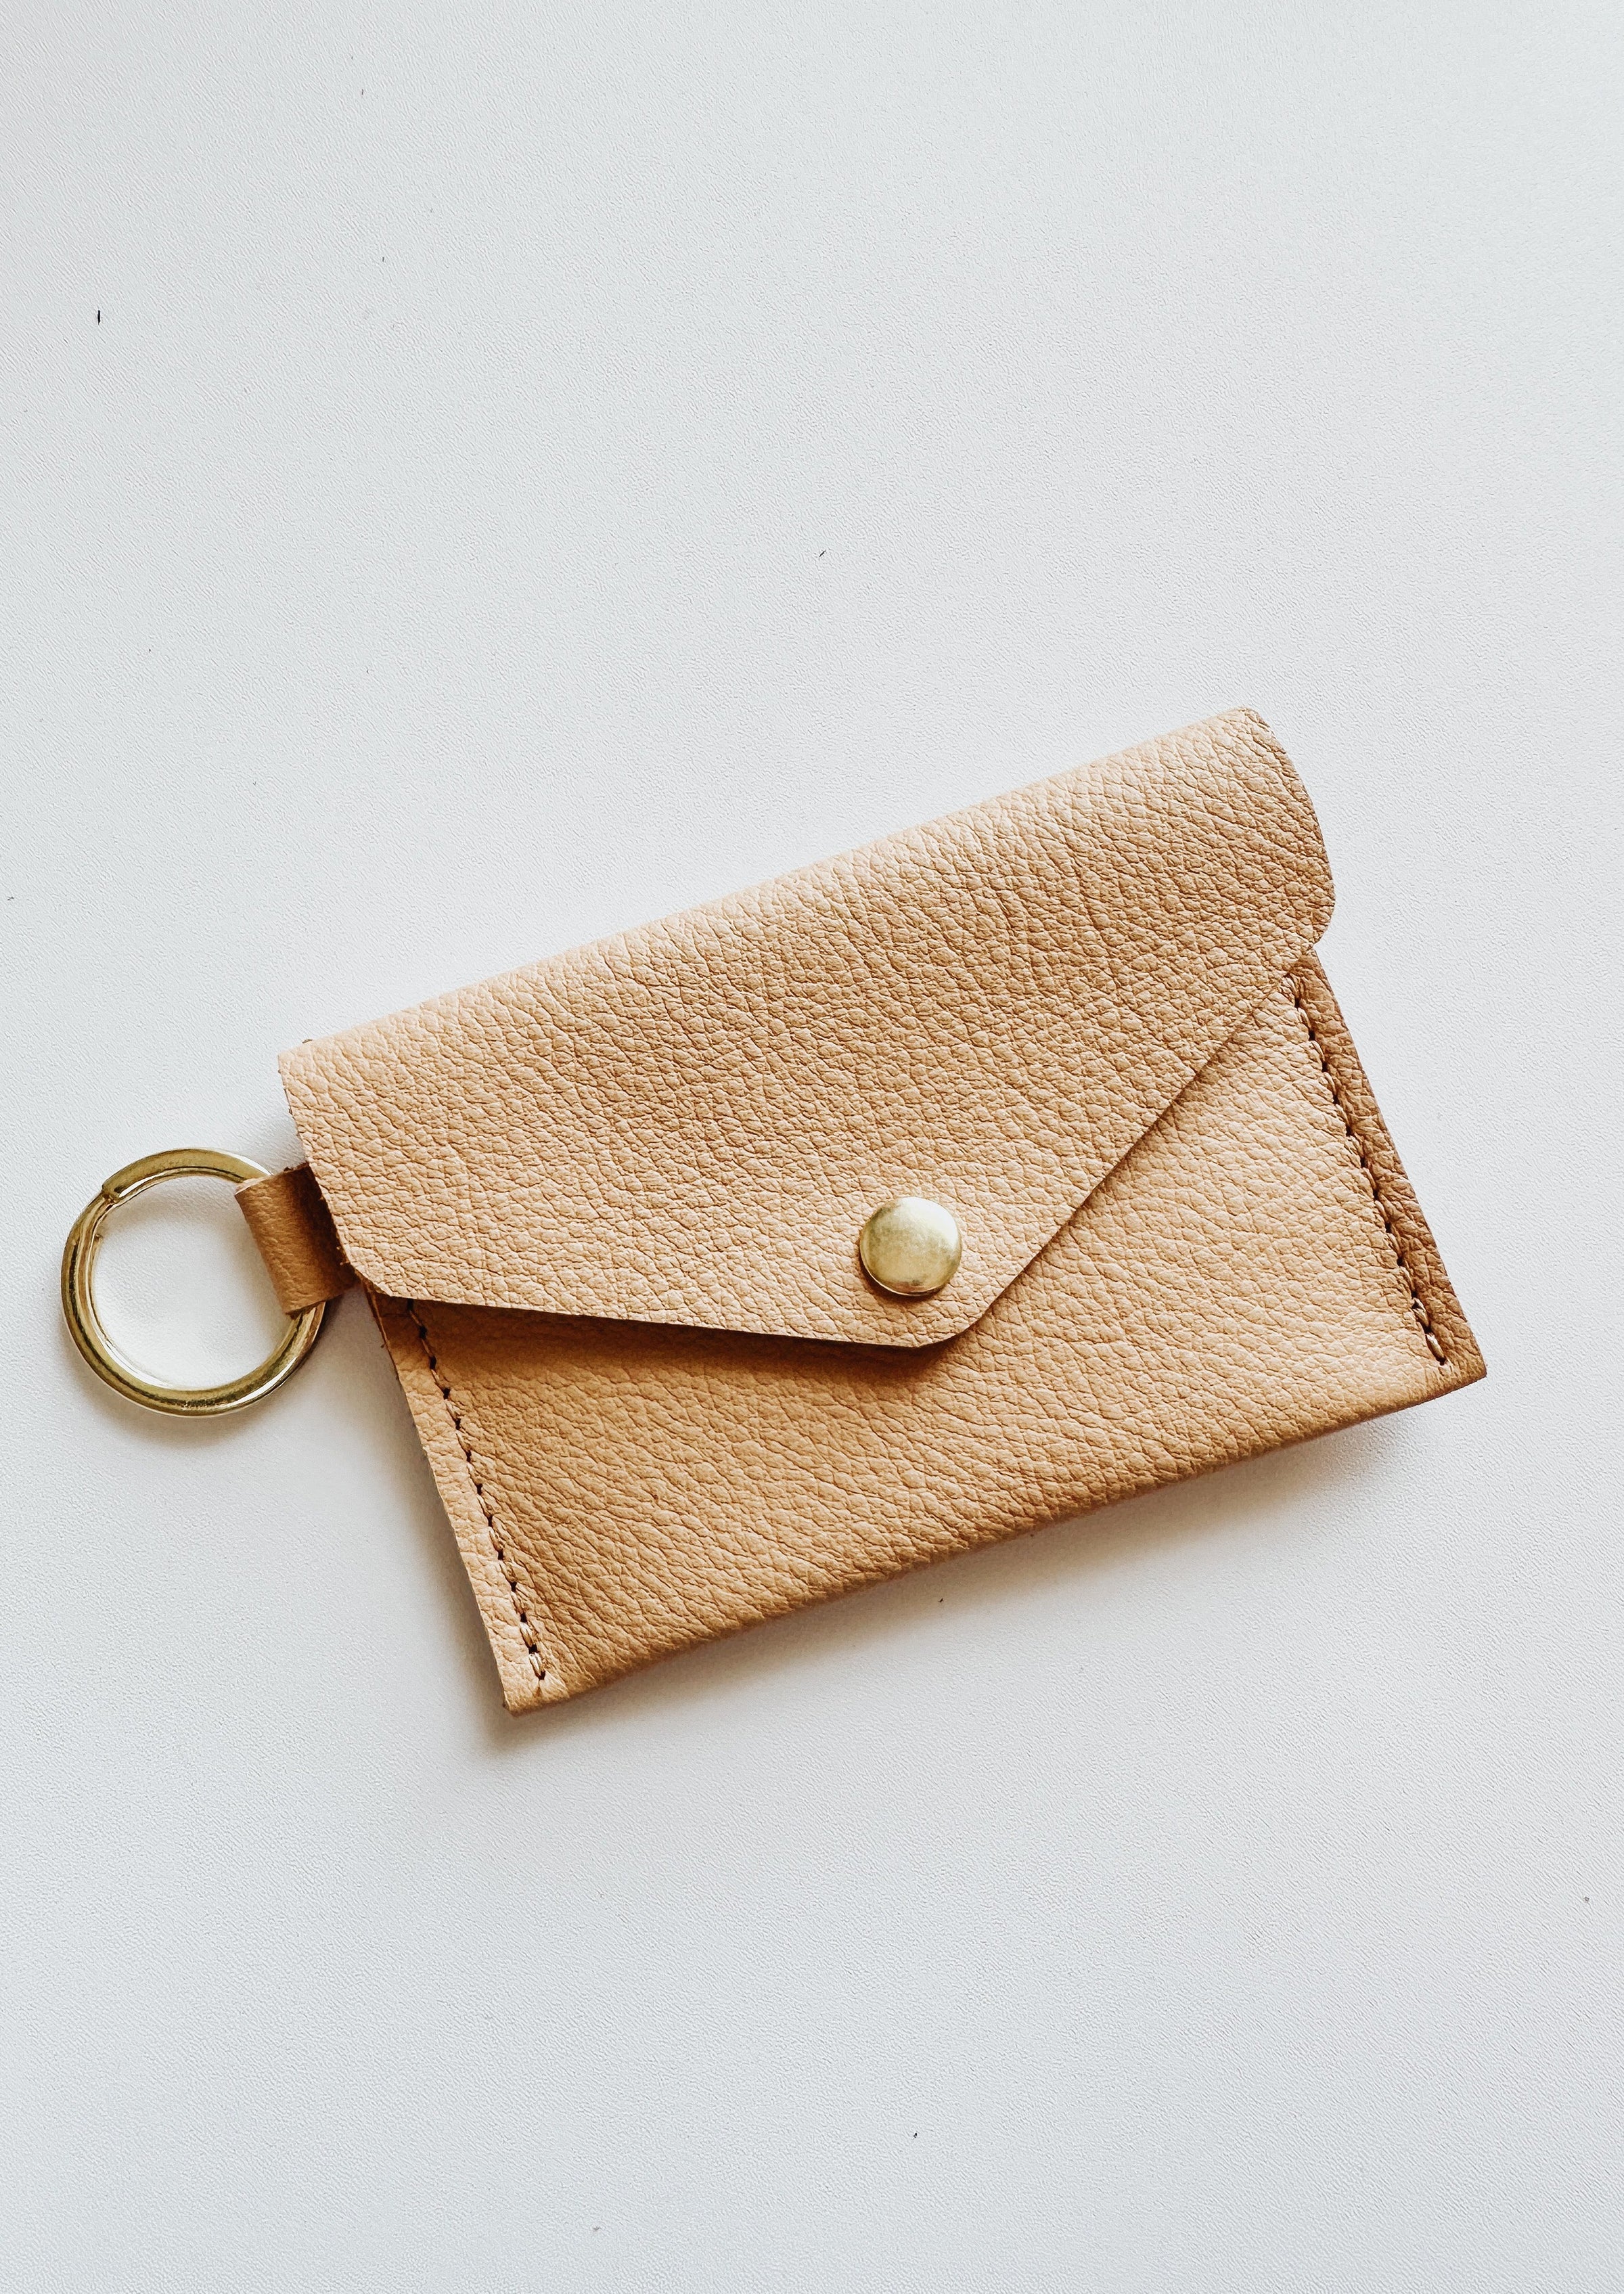 Florence P. Keychain Wallet in Black